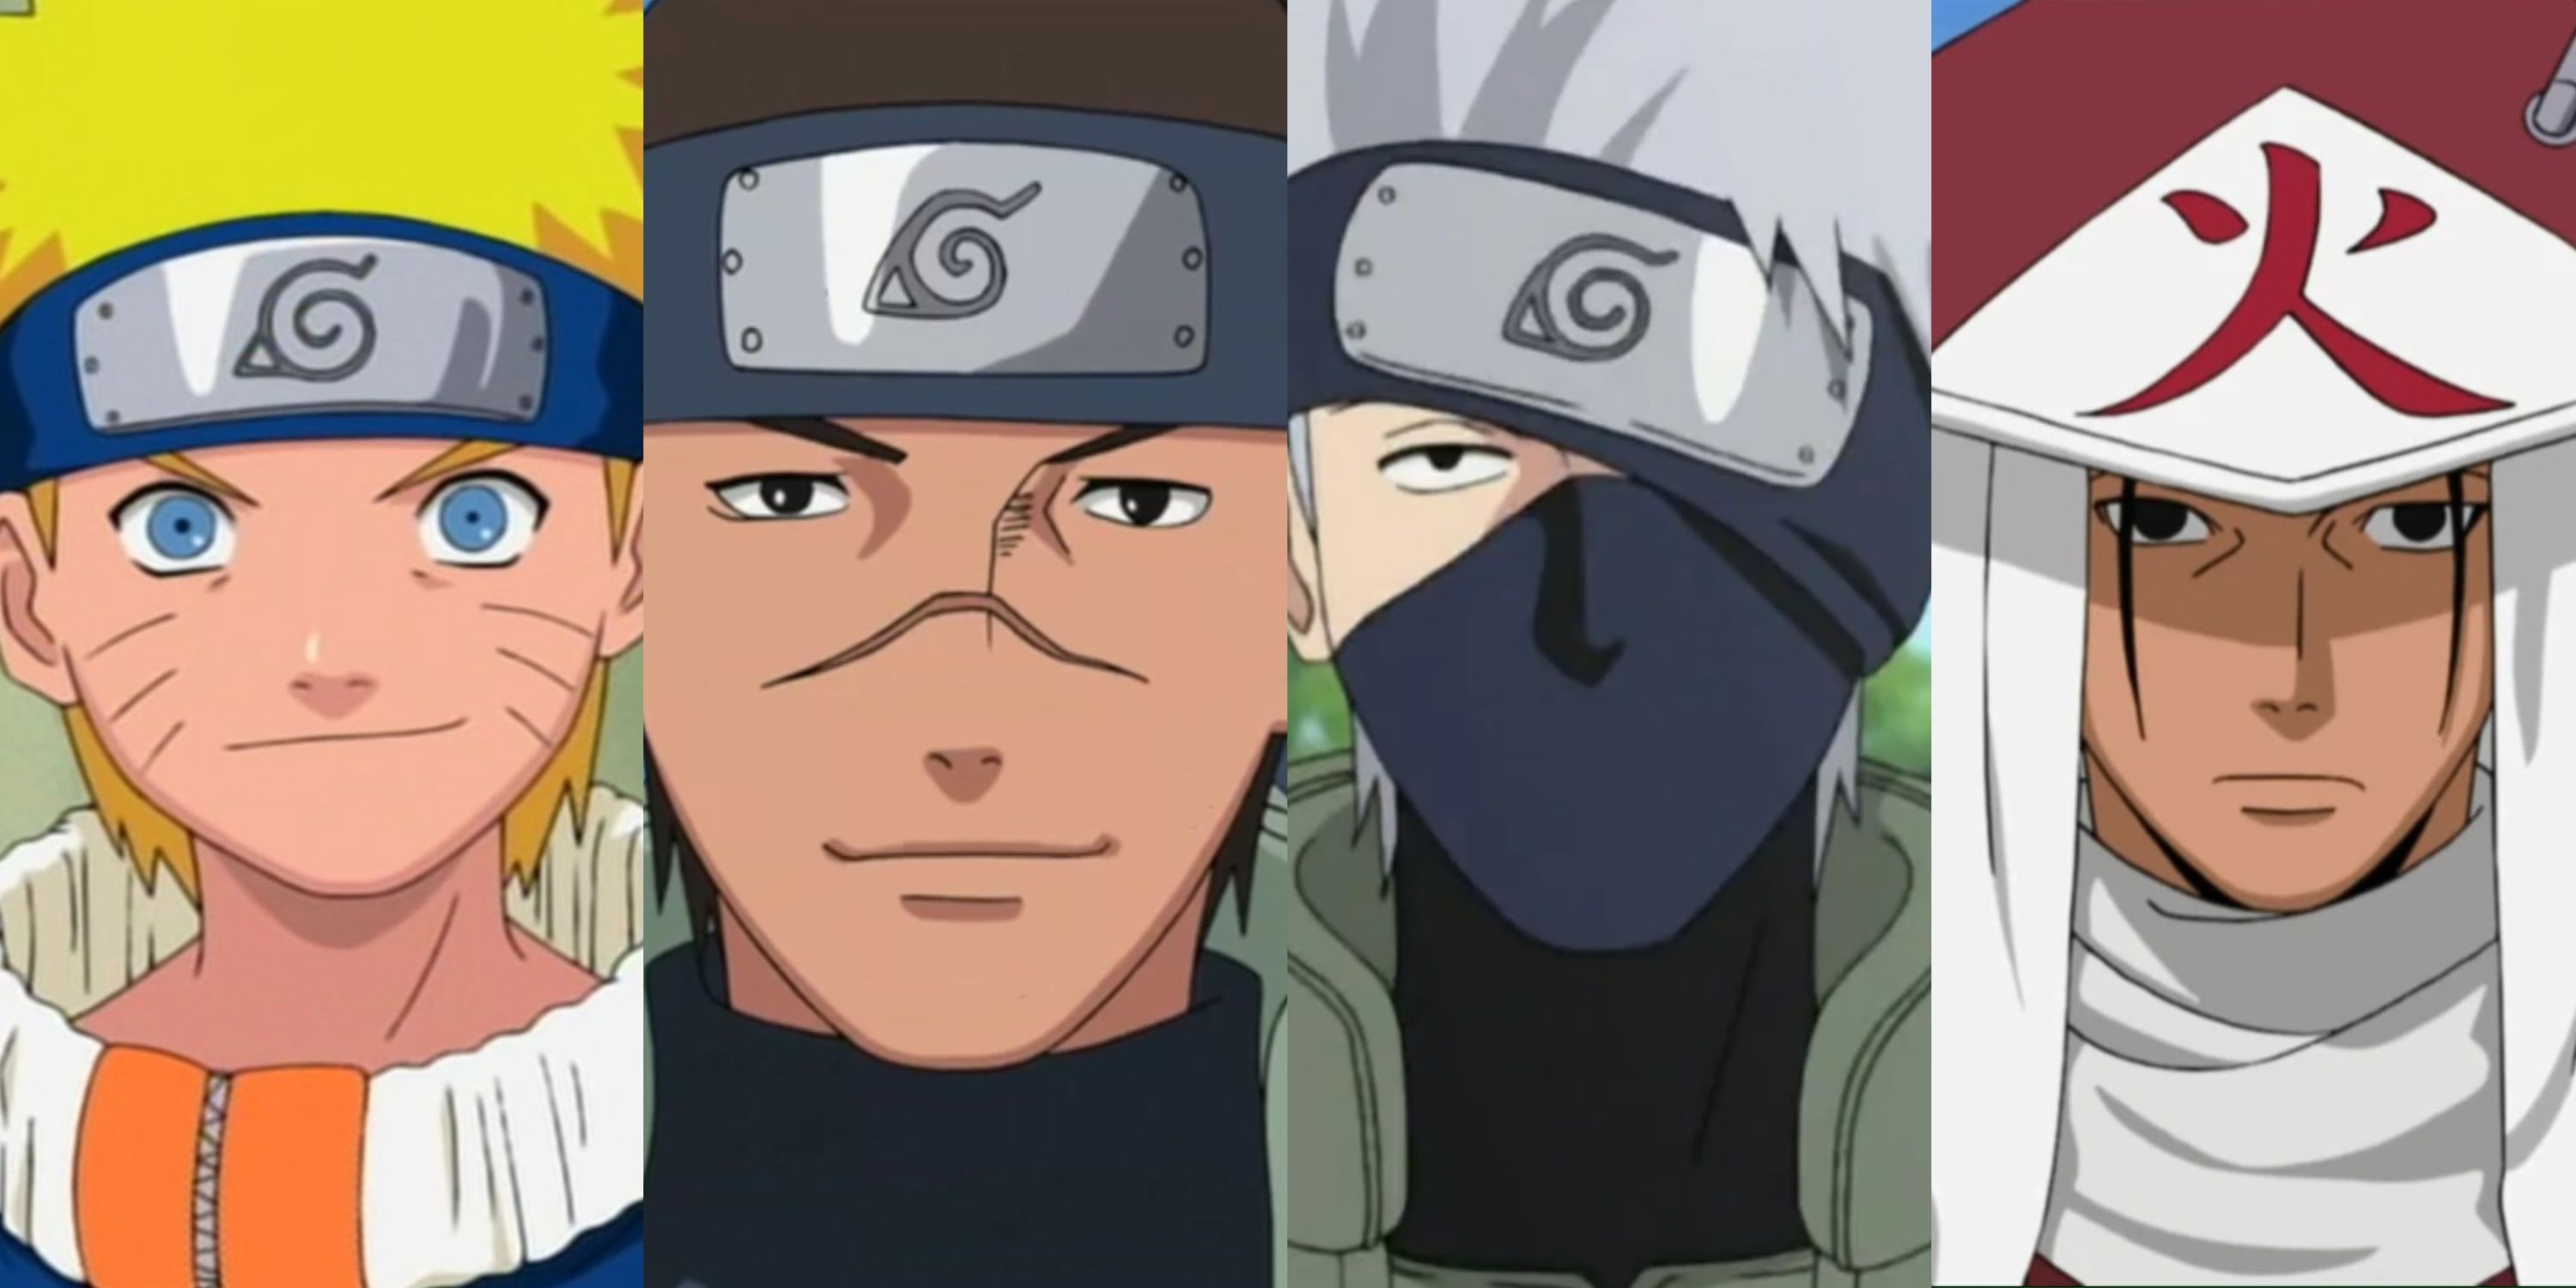 Can you visibly distinguish the difference of ranking of Shinobi in Naruto?  Age normally makes it obvious they're not G, but I think it would be cool  if there was a visible